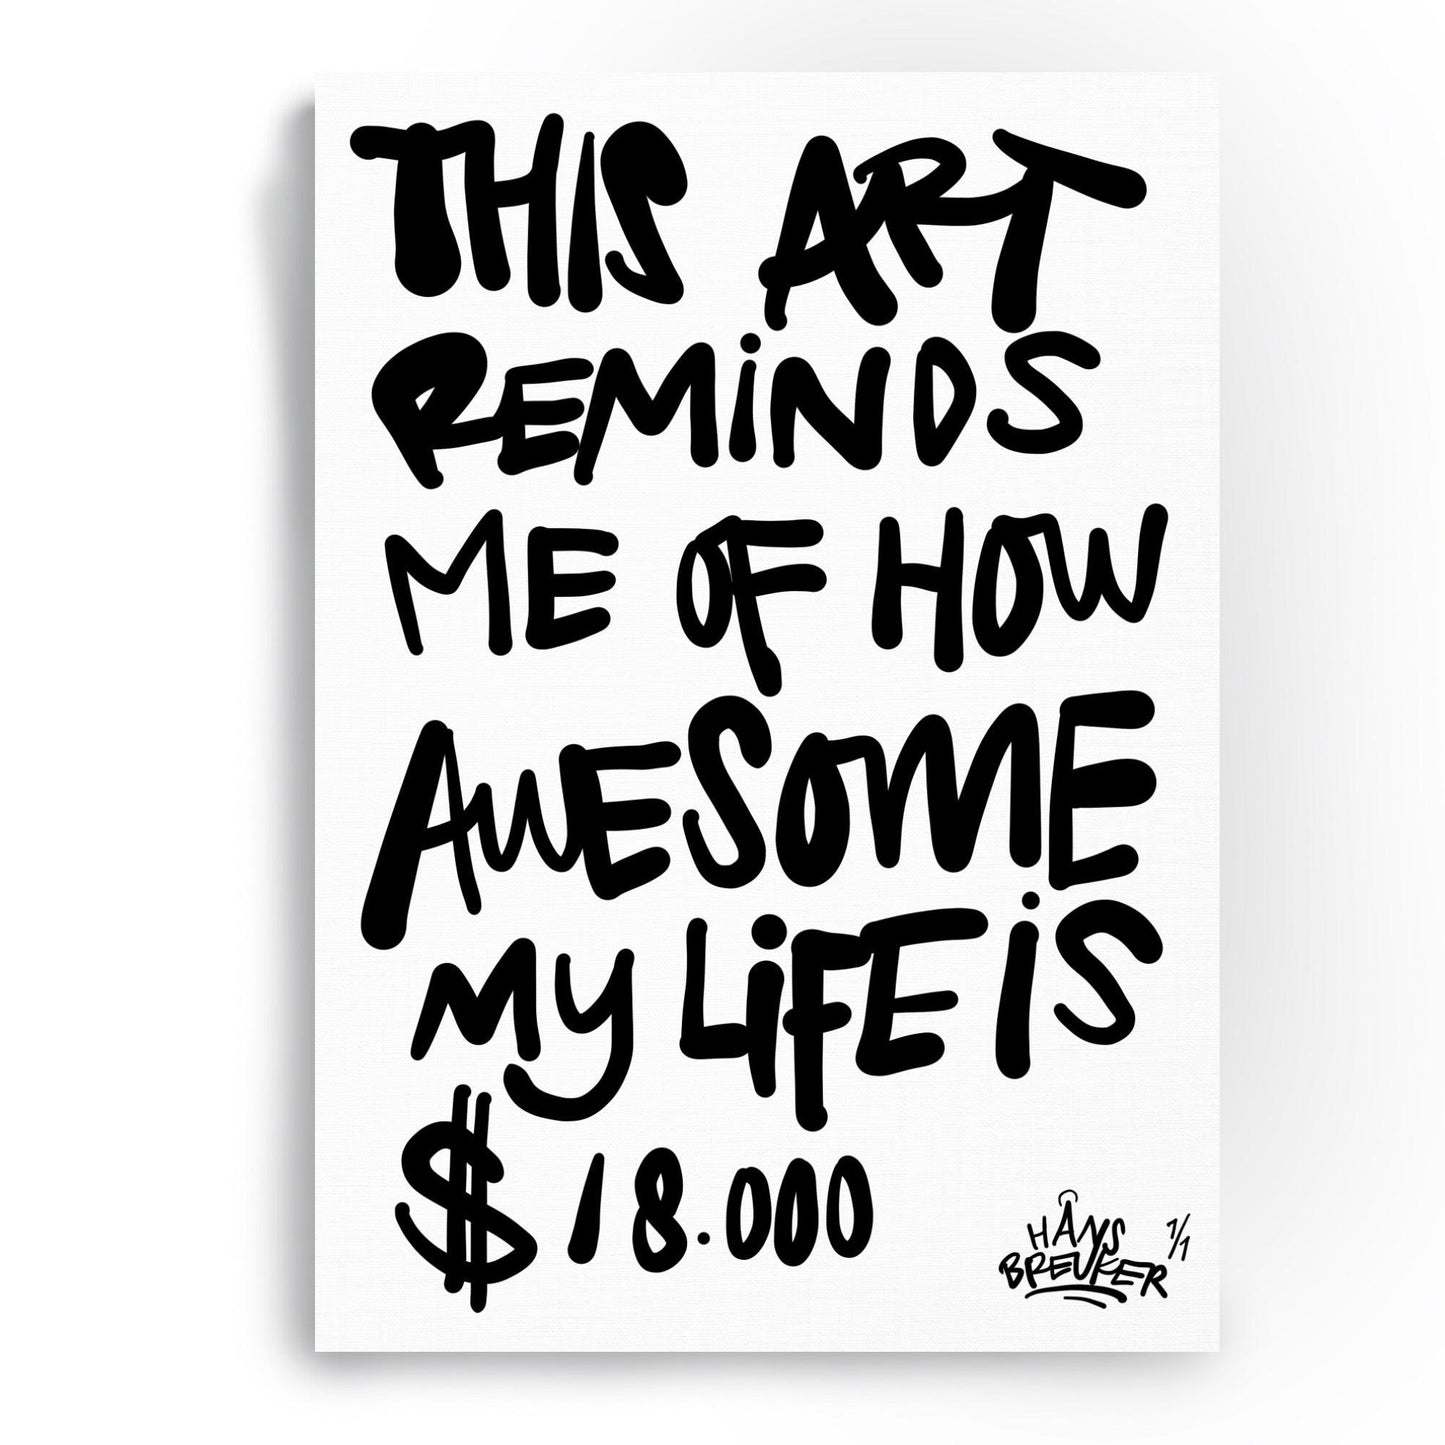 This art show me of how awesome my life is $18.000 - Hans Breuker